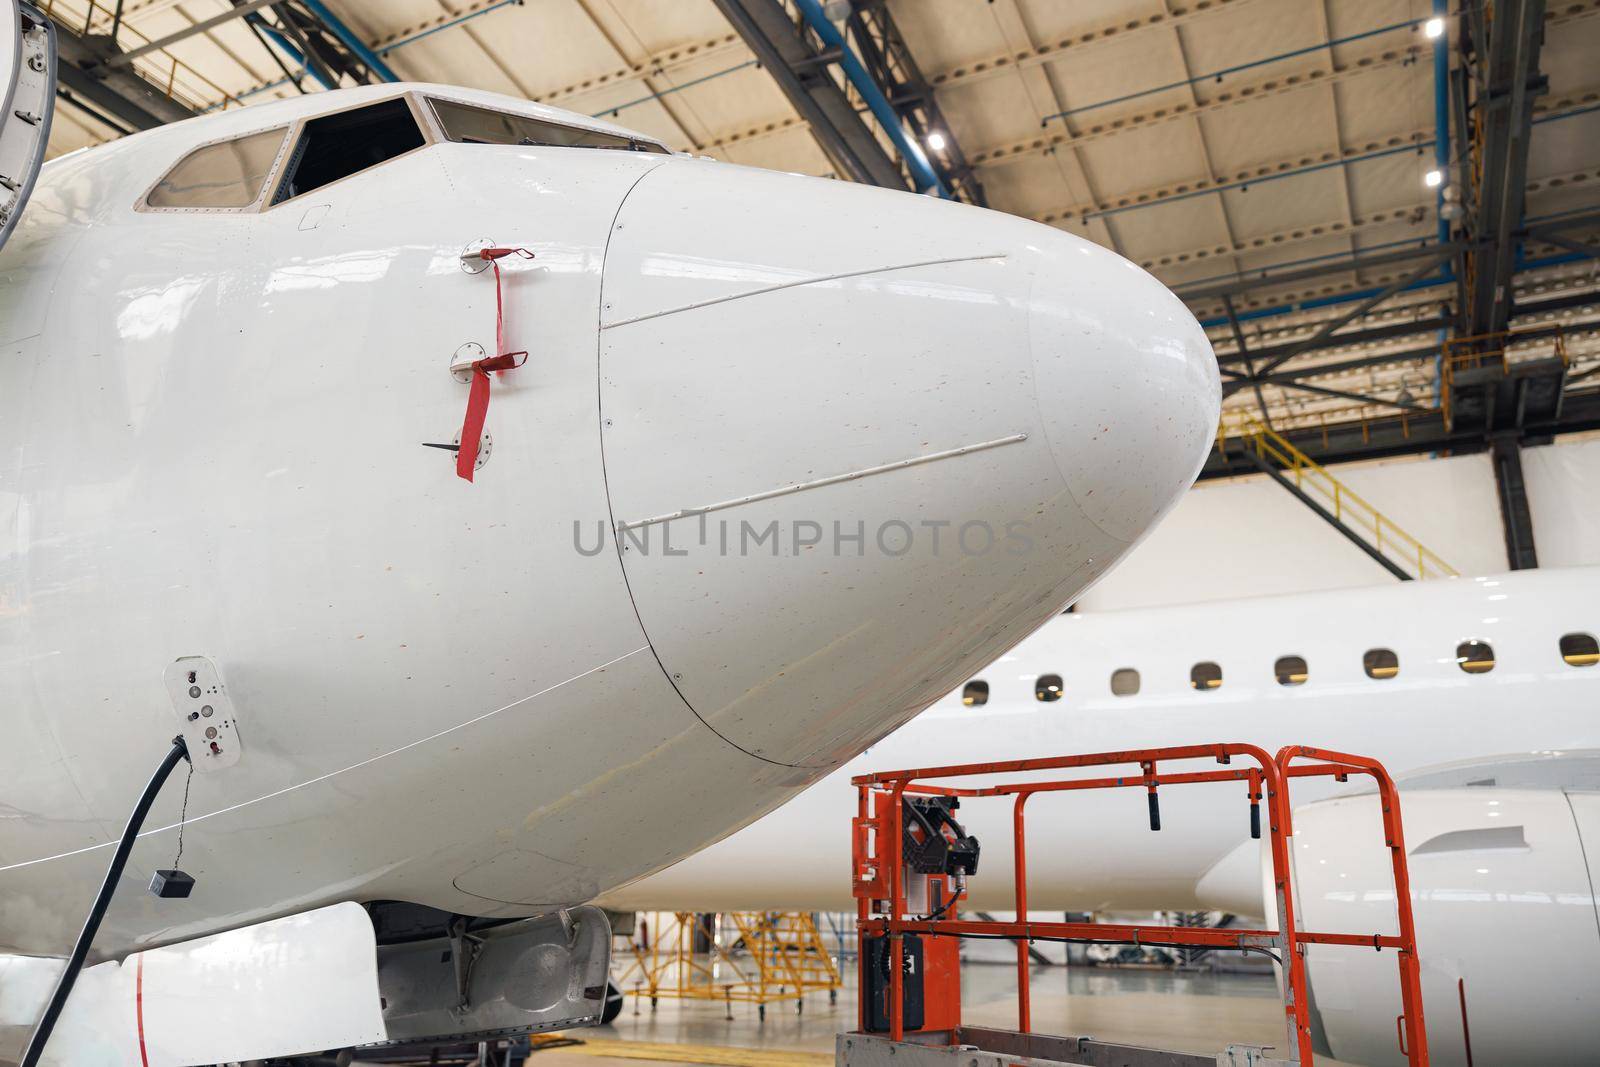 Close up shot of fuselage of modern passenger airplane on maintenance repair check in airport hangar indoors. Aircraft. Plane, shipping, transportation concept